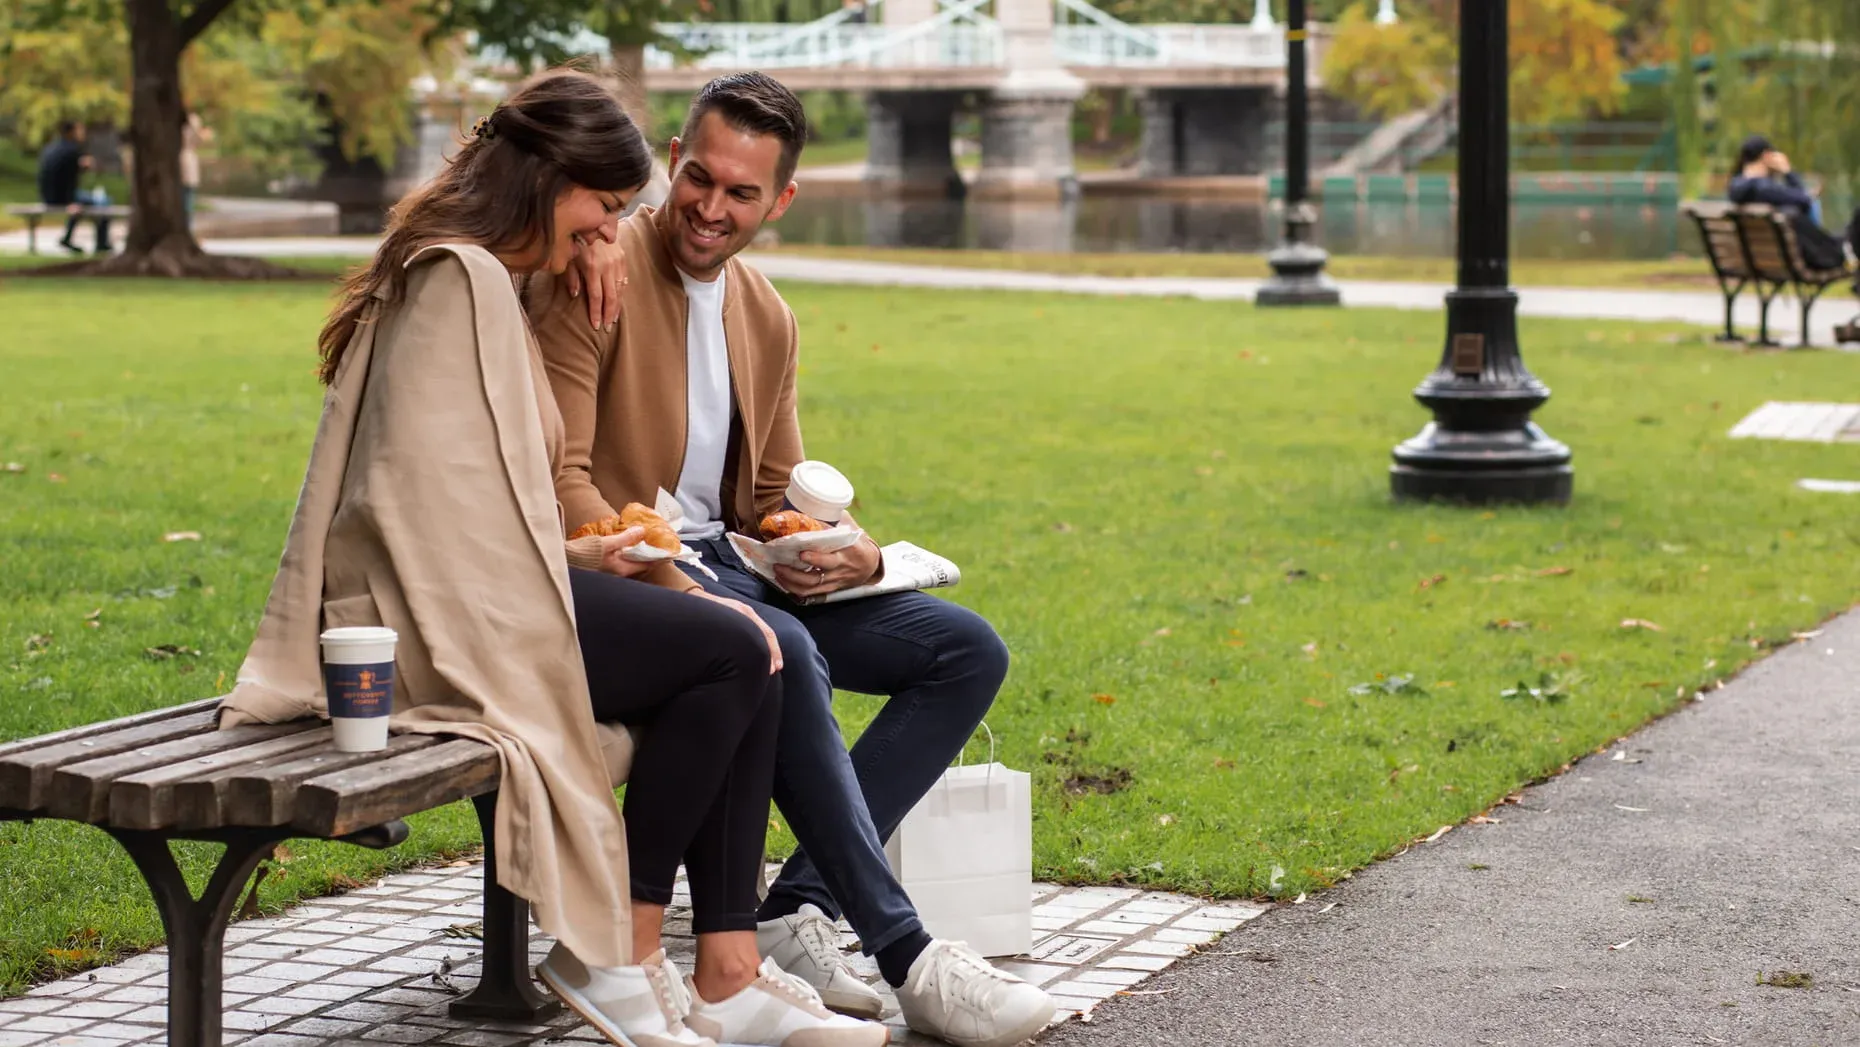 Couple Sitting on Bench In Public Garden With Coffee In Hands